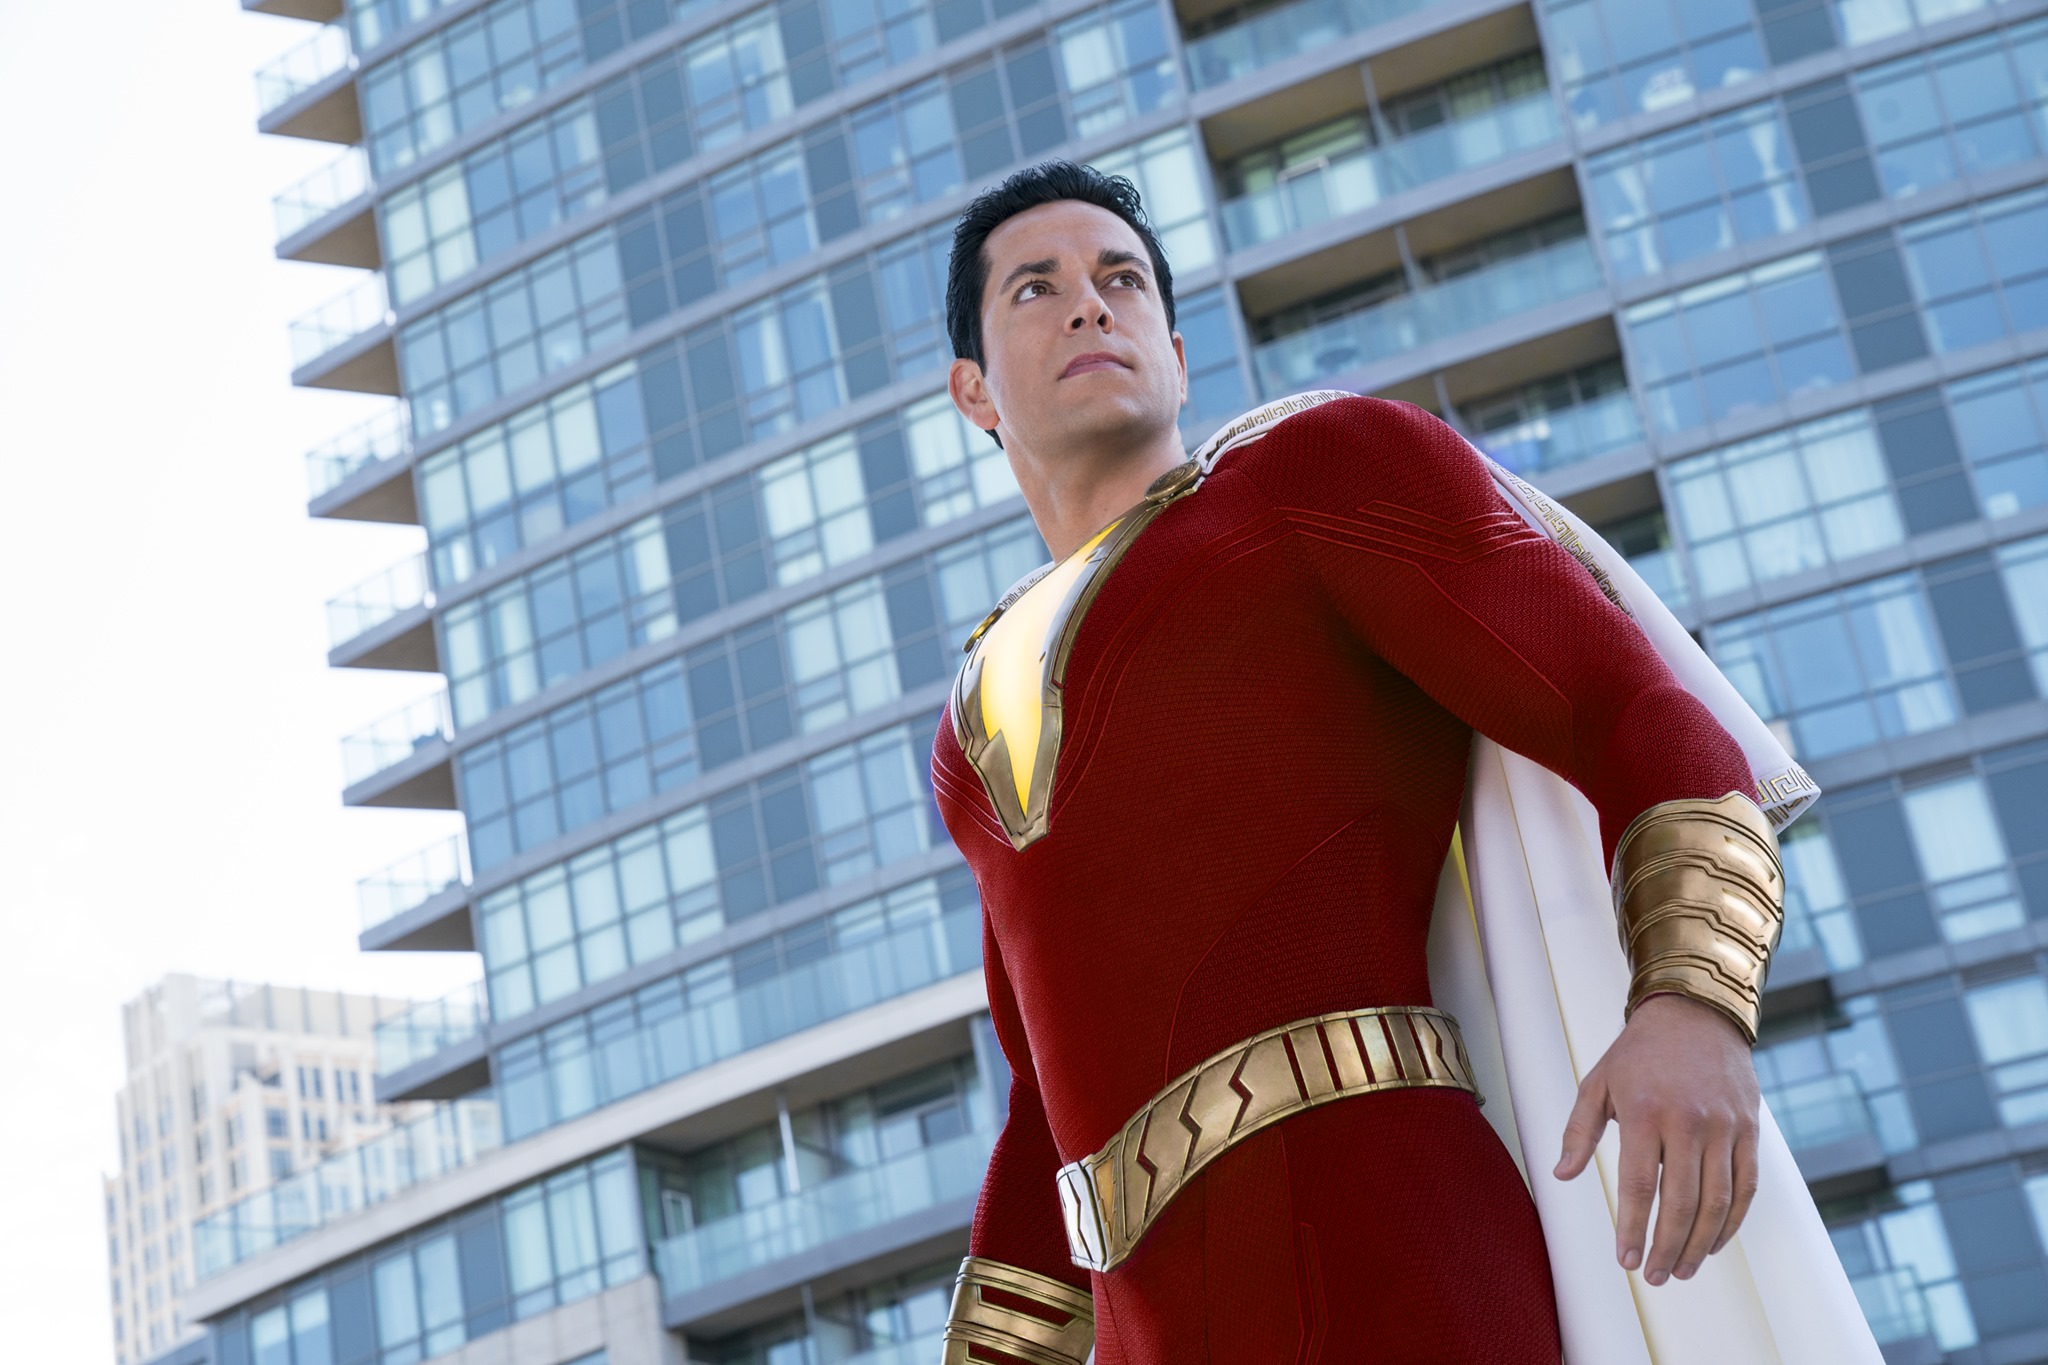 DC Announces 'Shazam! Fury Of The Gods' Will Have Its Own Panel At